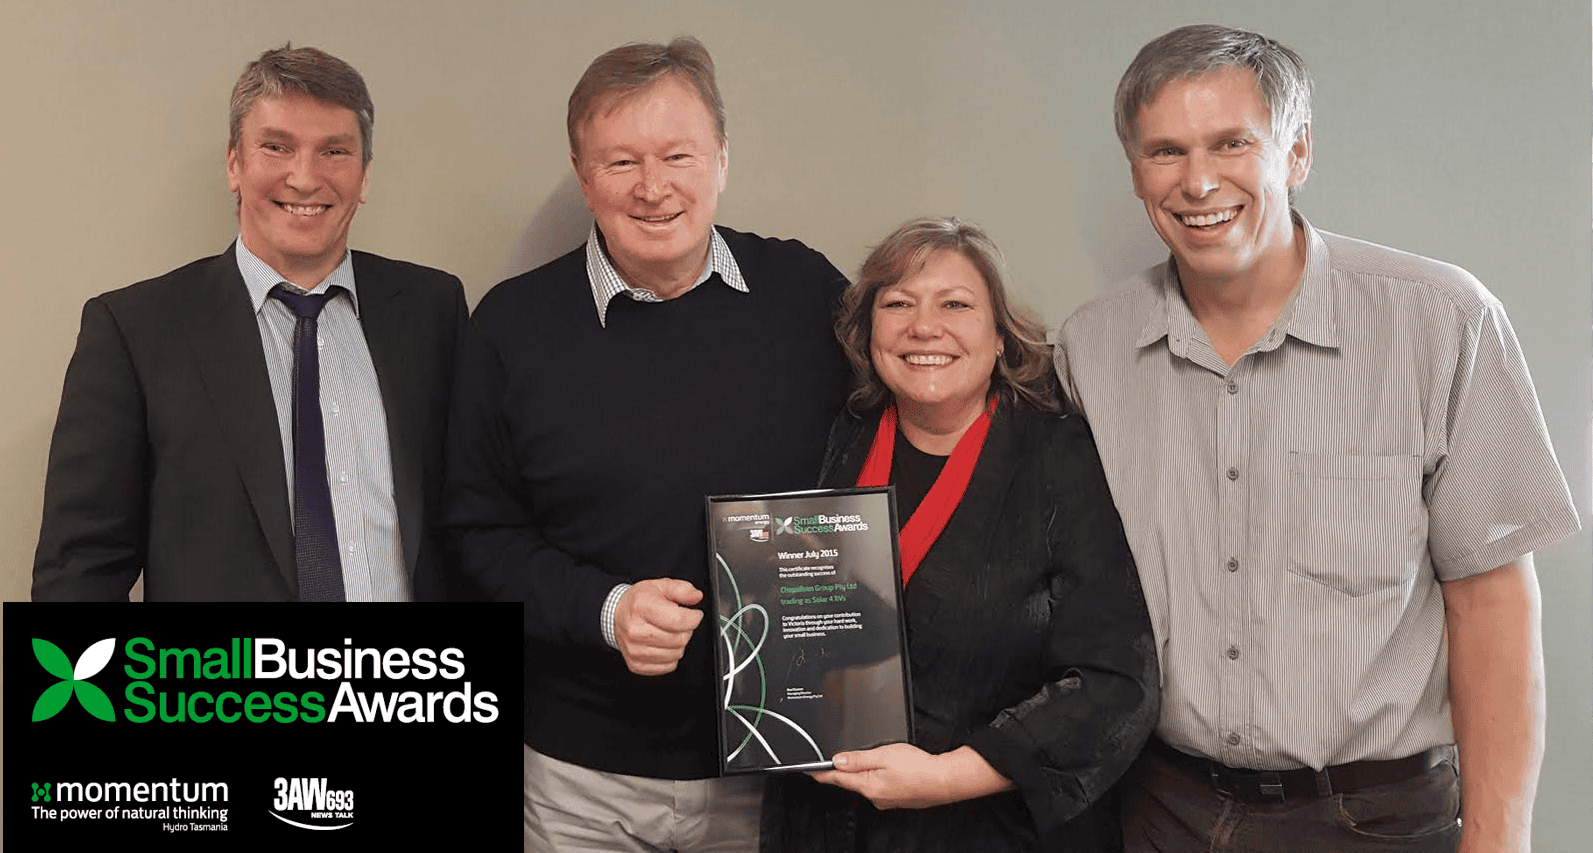 Solar 4 RVs accepts 3AW Business success Award from Denis Walter